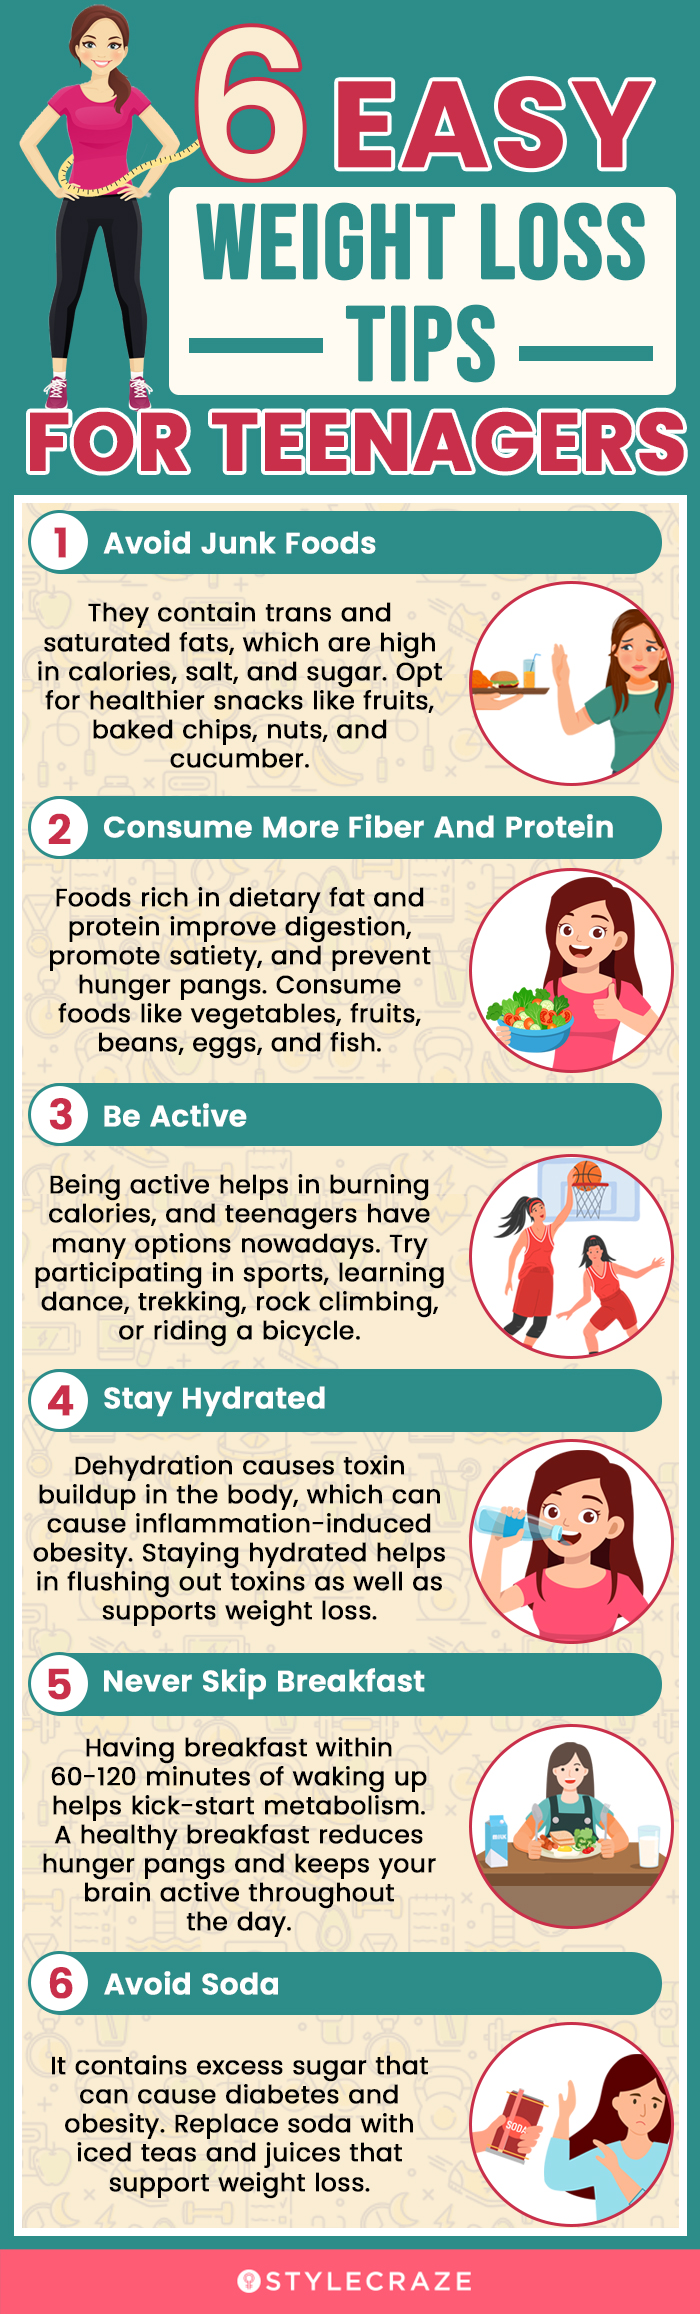 6 easy weight loss tips for teenagers (infographic)